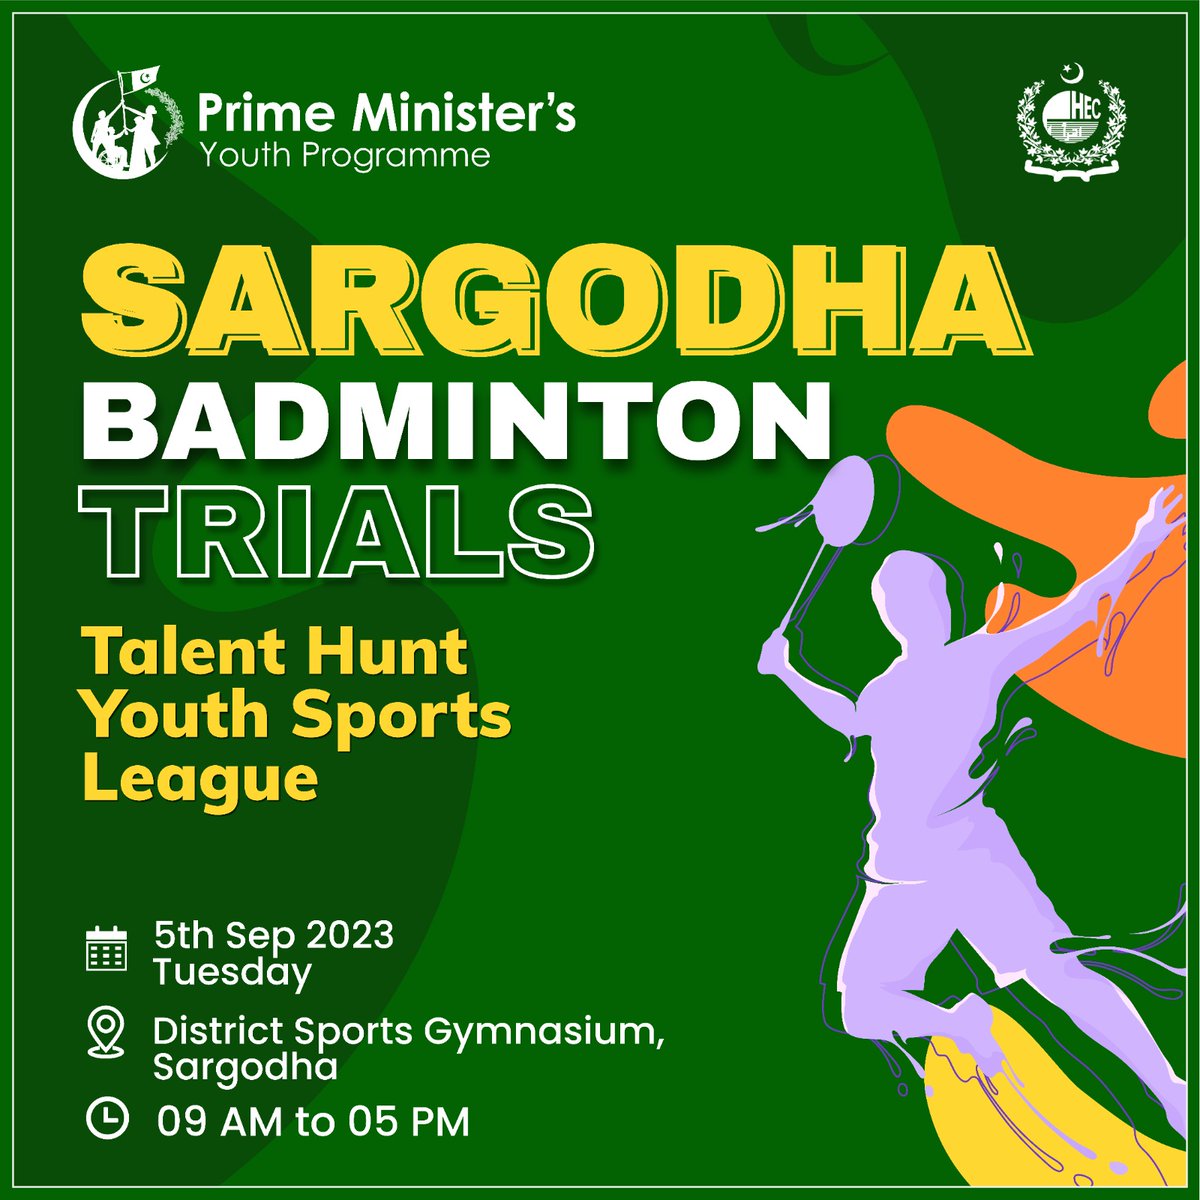 Calling all Badminton Superstars of Mardan, Uthal, Karachi & Sargodha! Get ready to serve up your best game! 🏸Badminton Talent Hunt is now happening in your city. For male and female players age 15-25 years, Avail the chance to be the next SUPERSTAR.